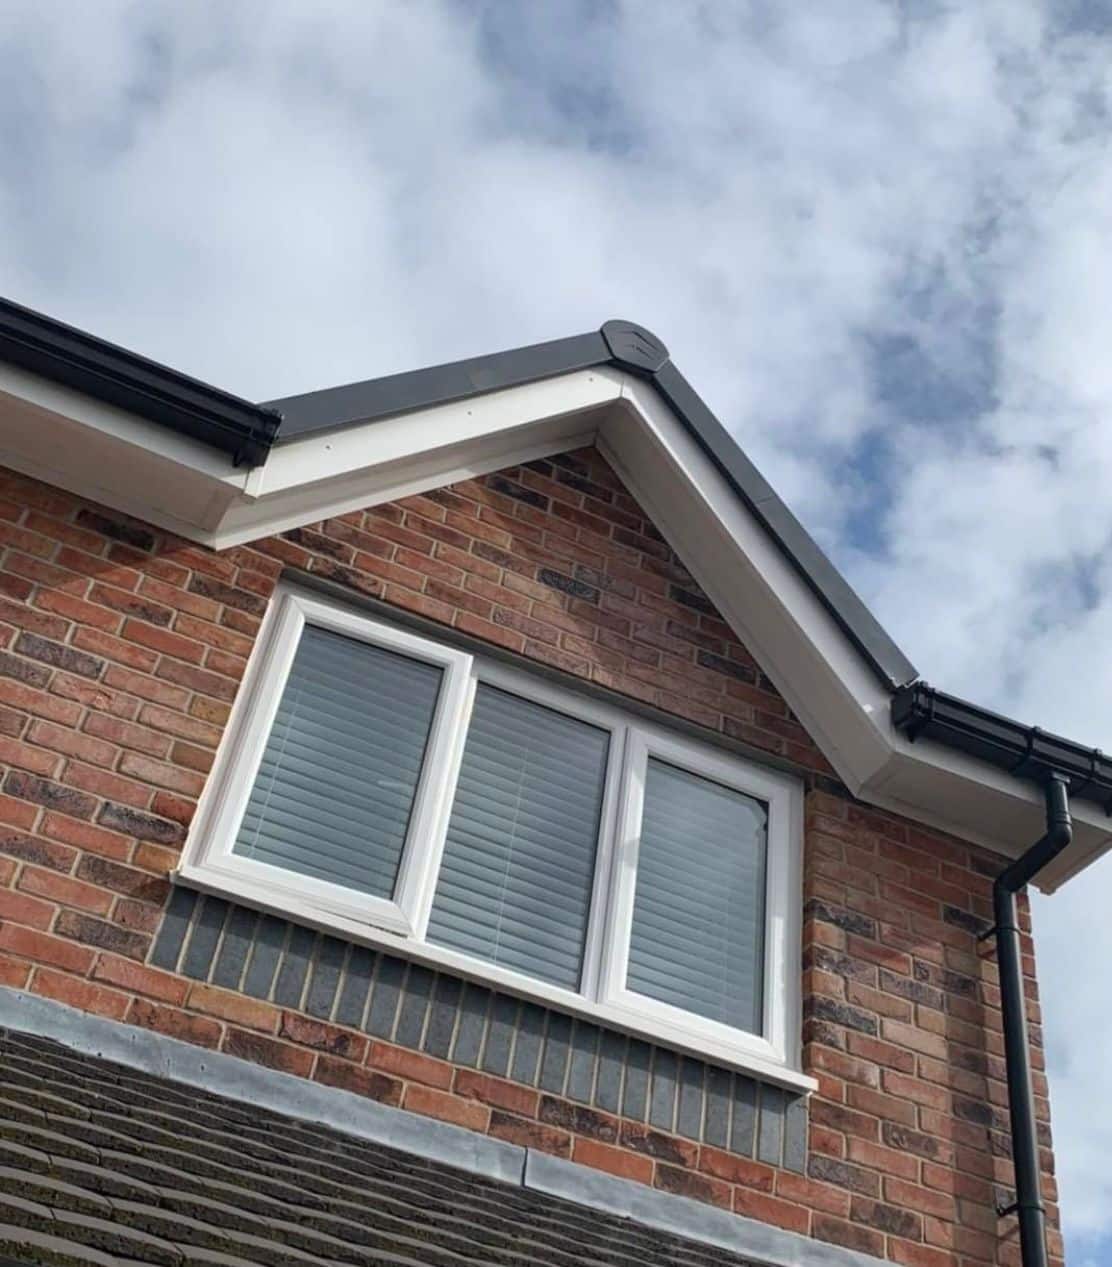 Gutters, Fascias, Soffits Contractors Gwytherin, LL22 - DD Roofing